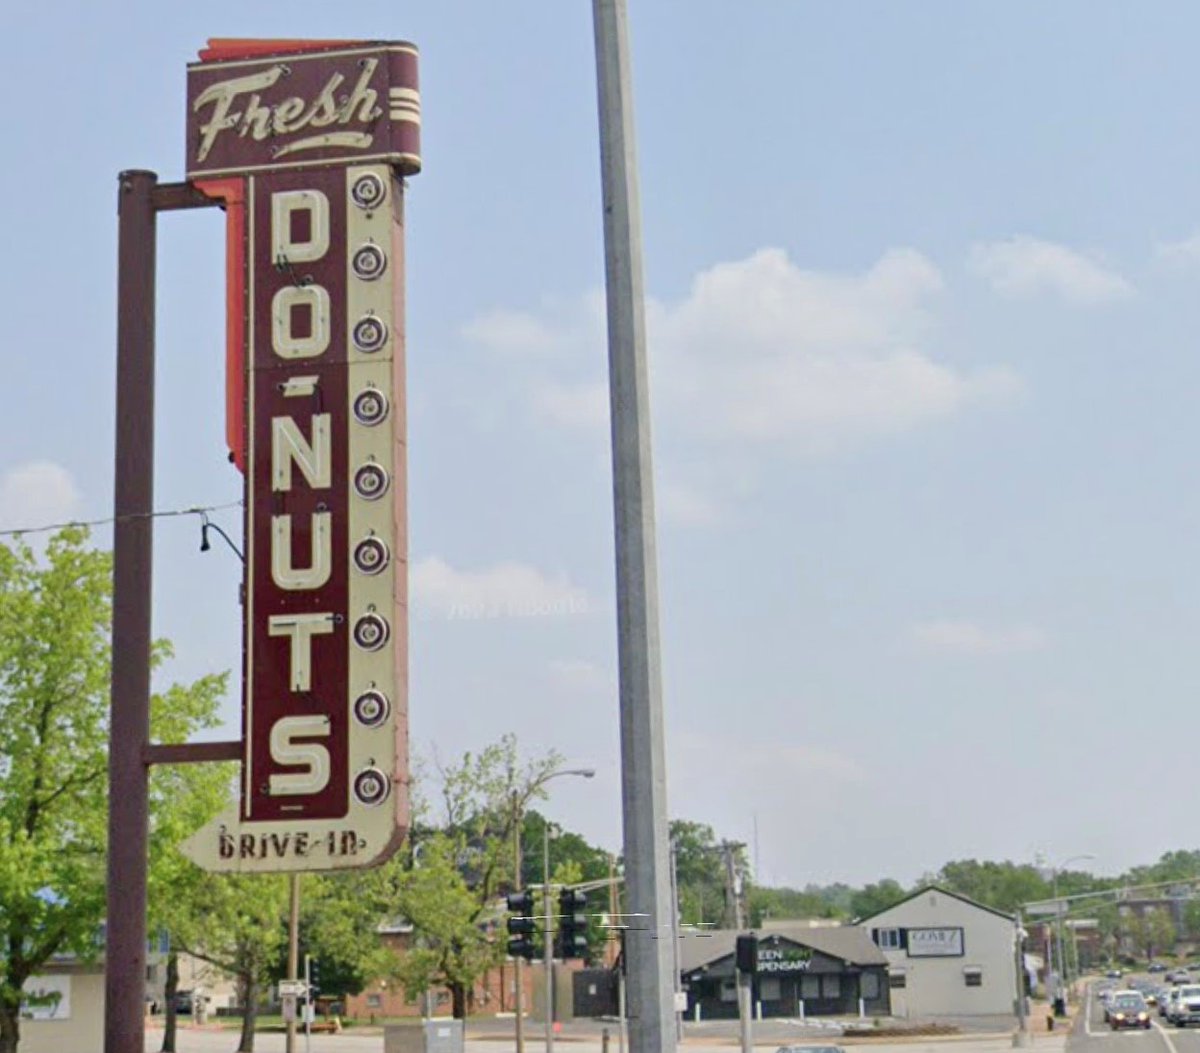 In honor of National Donut 🍩Day, I'm sharing a brilliant example of co-marketing. A weed shop recently opened next door to the Donut Drive-In in St. Louis. The donut management reports that sales are through the roof (and maybe a little higher)! 🚀 #NationalDonutDay #DonutDaze